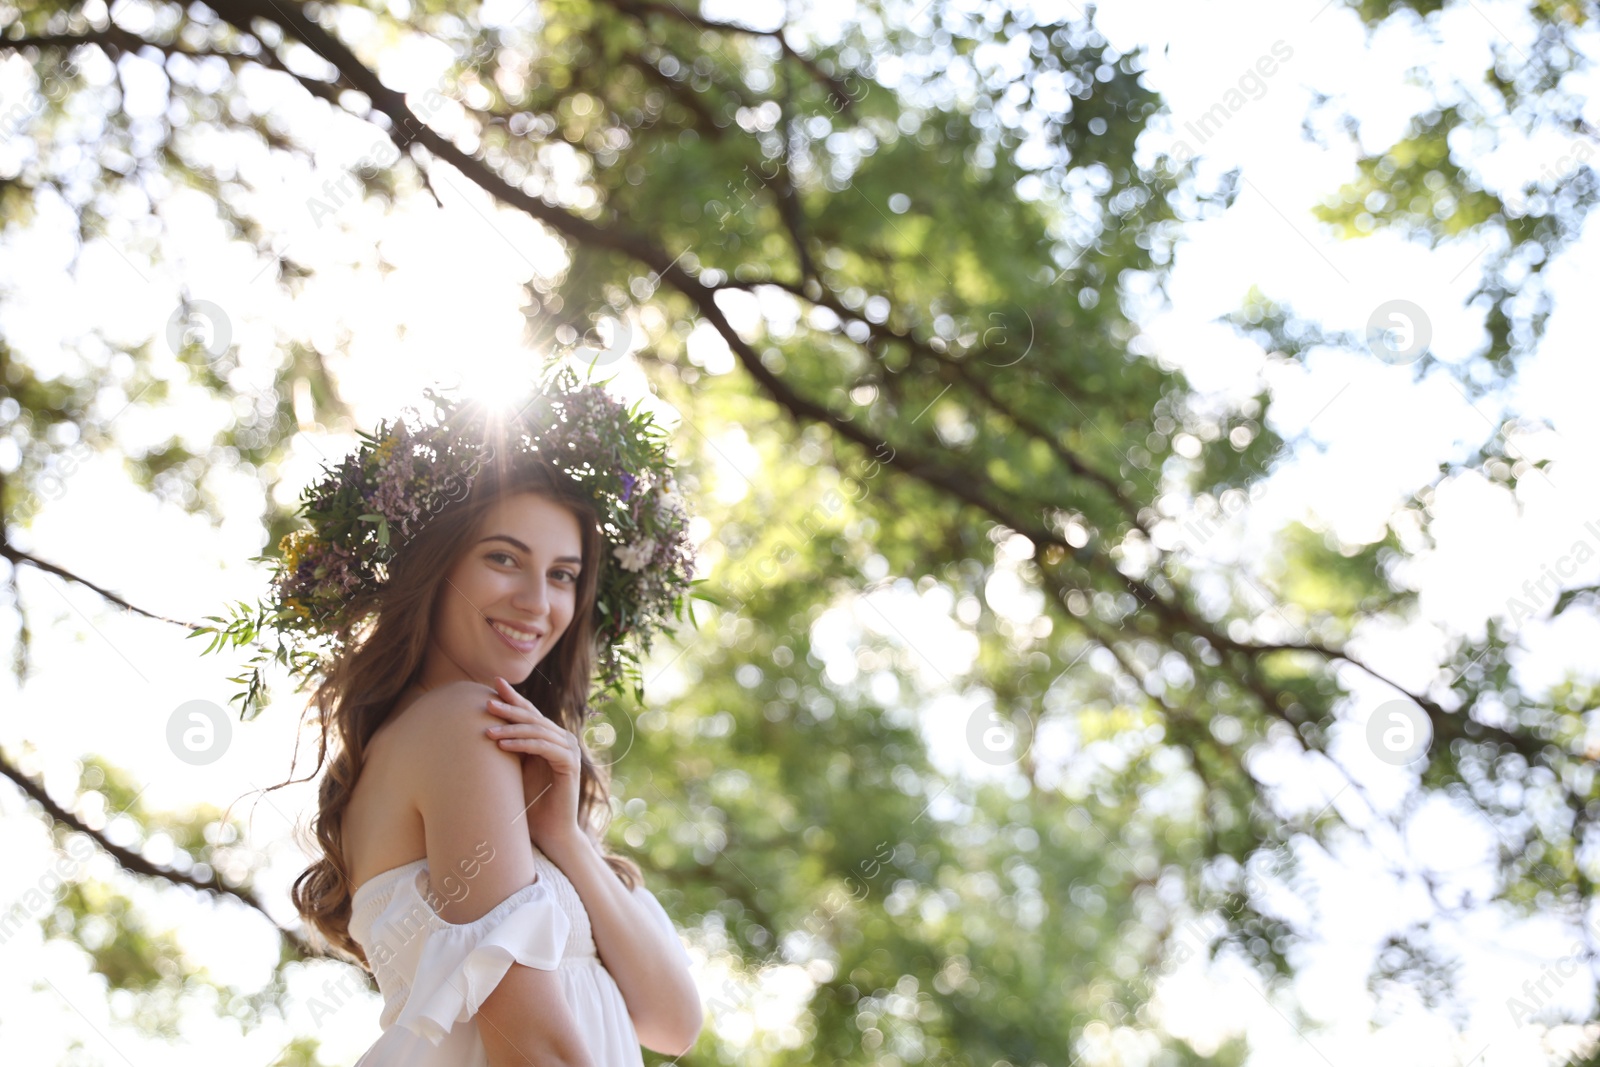 Photo of Young woman wearing wreath made of beautiful flowers outdoors on sunny day